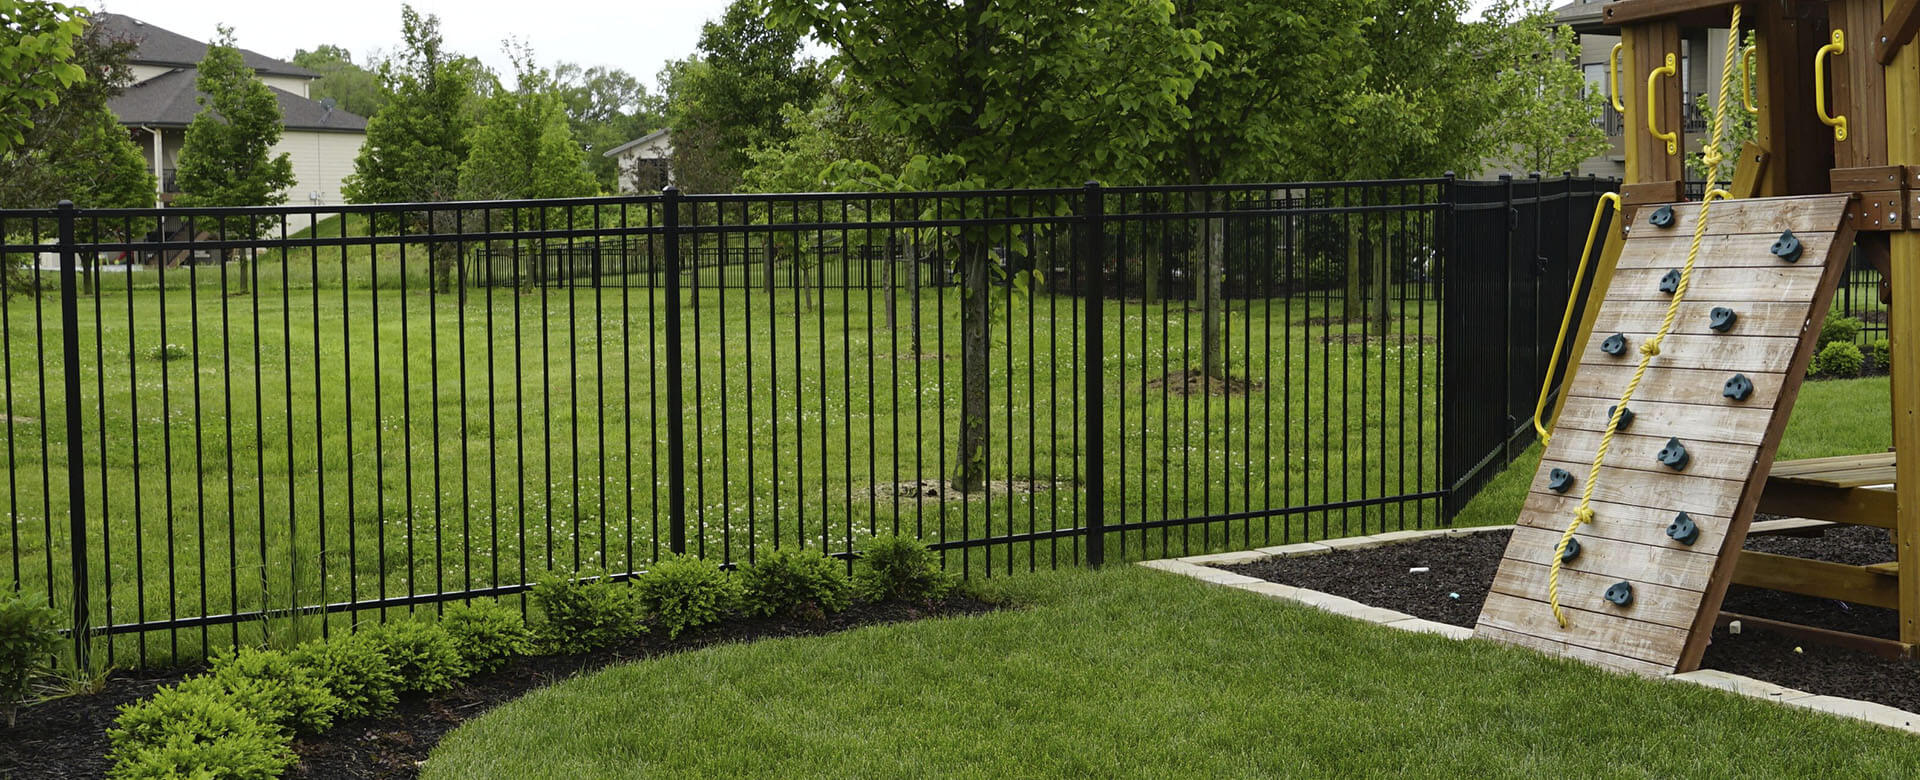 Fencing And Gates Barrette Outdoor Living